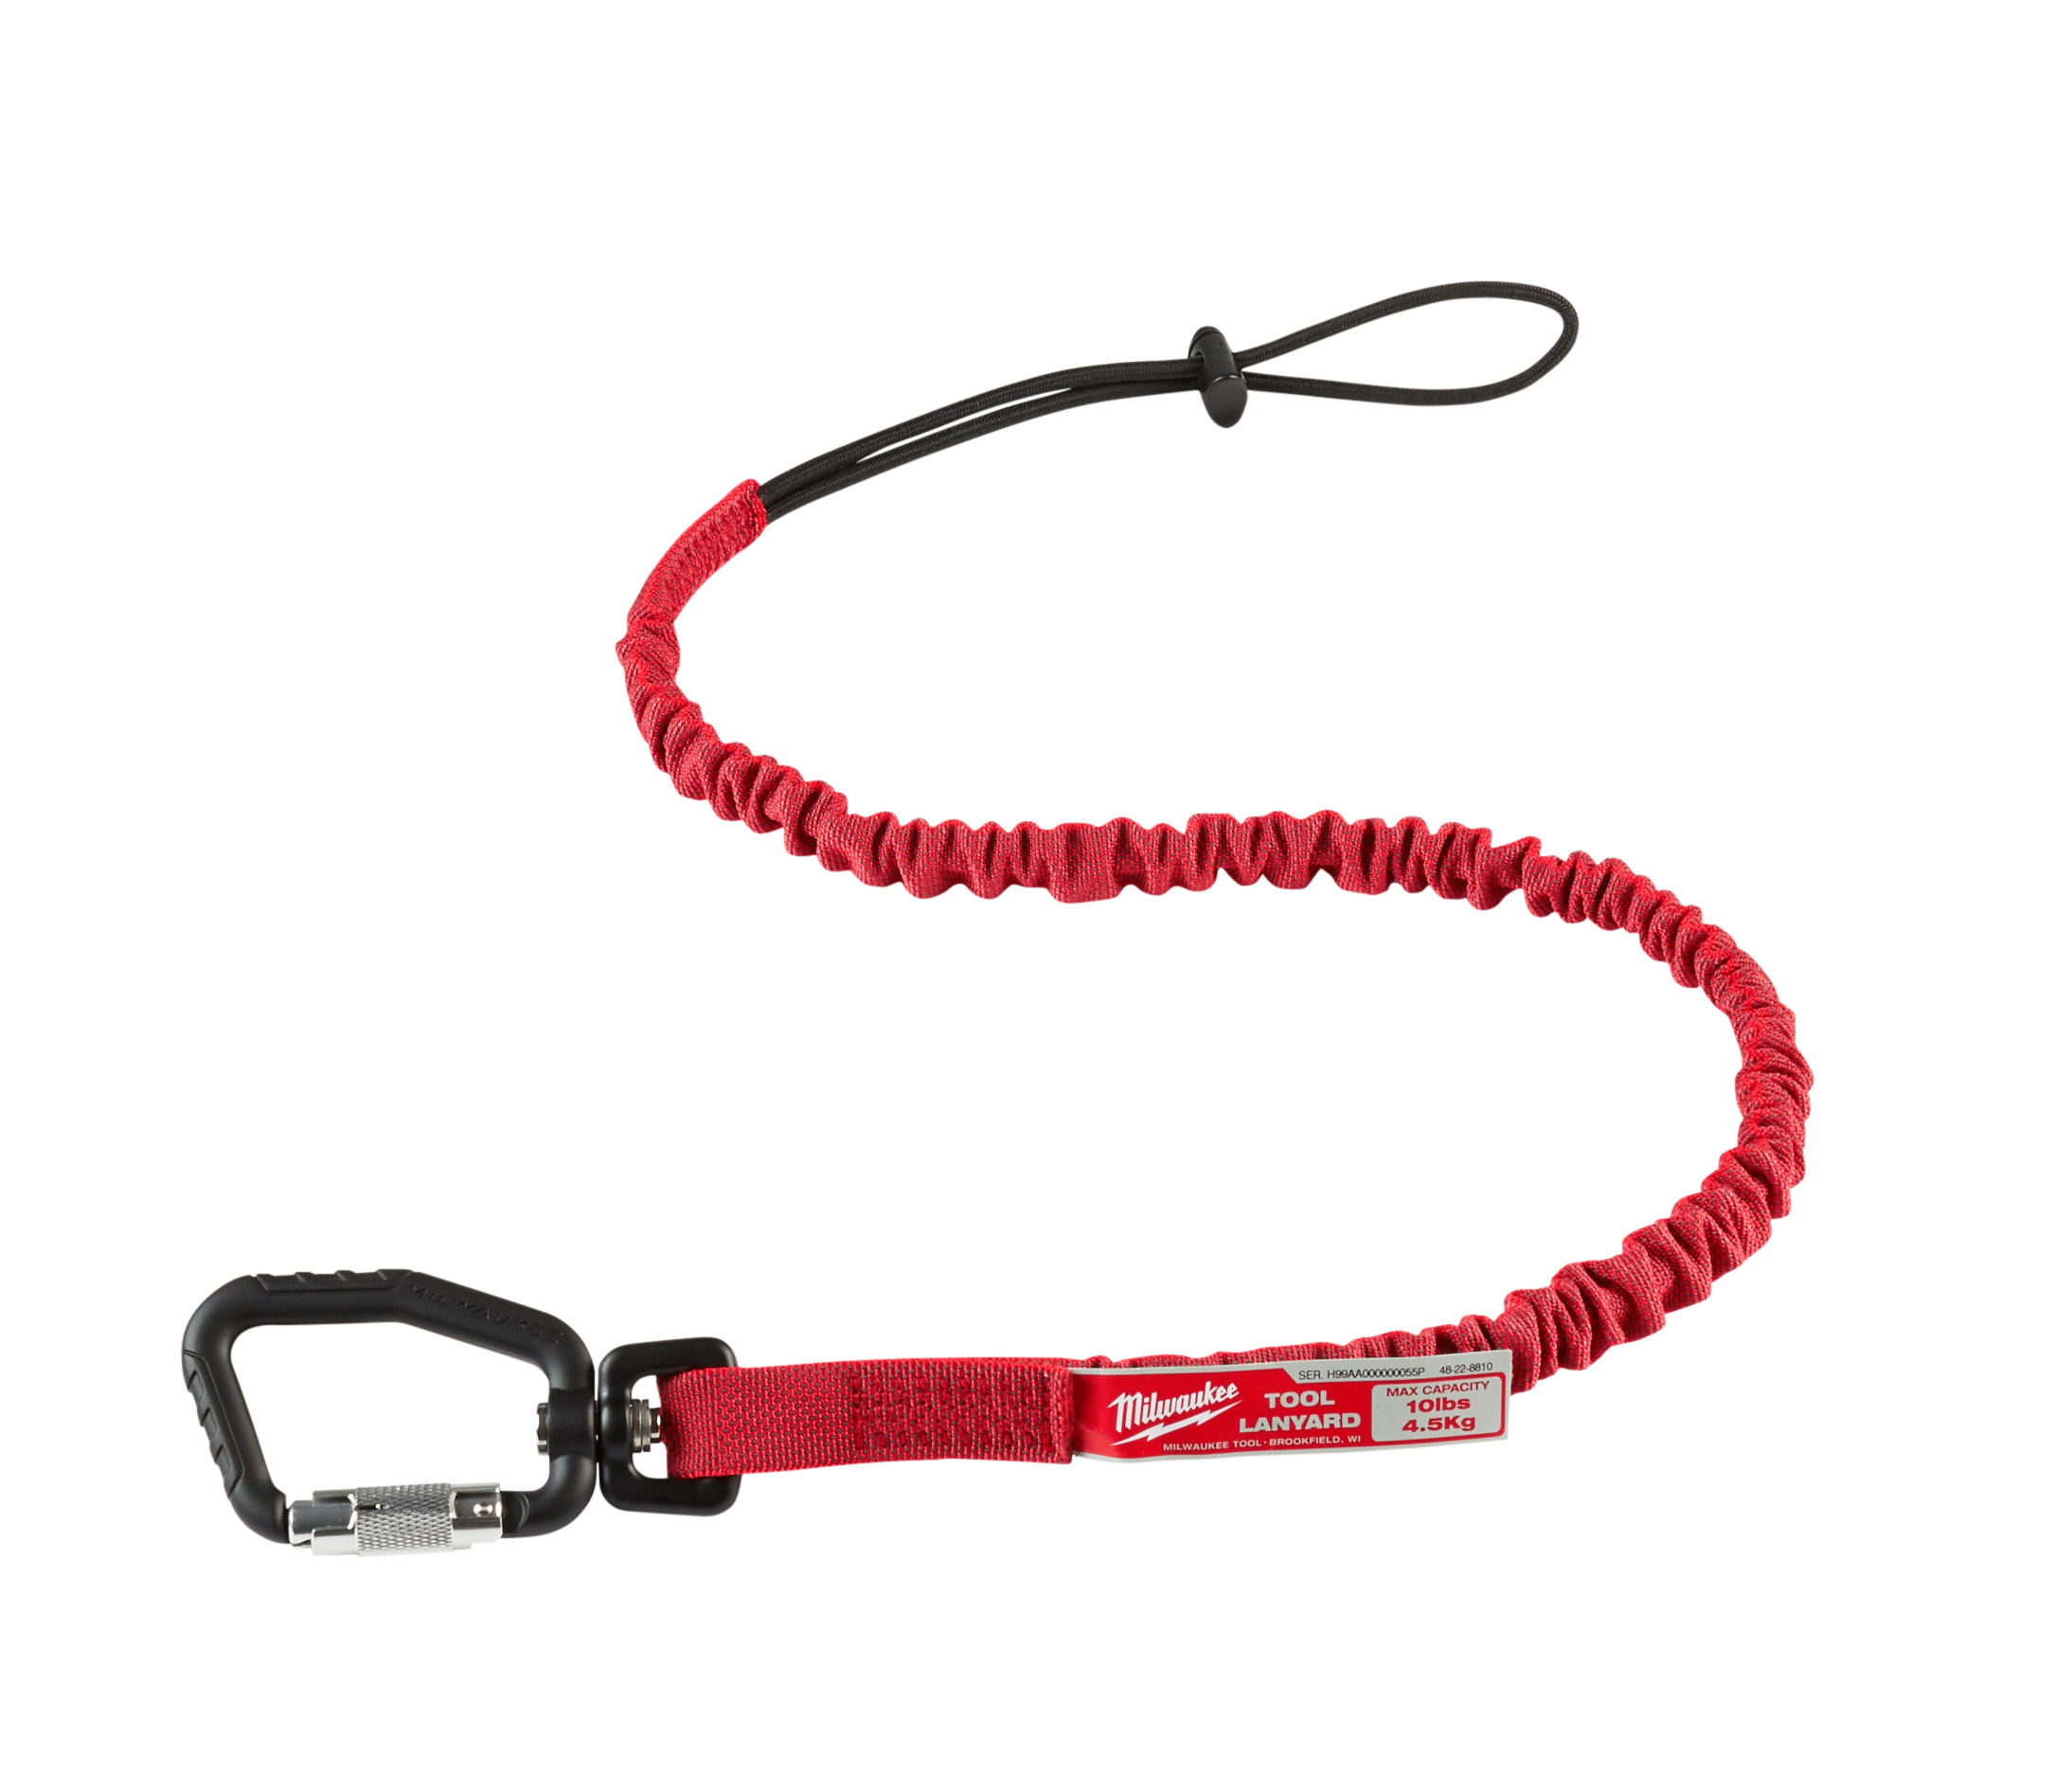 48-22-8810 045242505623 Milwaukee® 10 lb. Locking tool lanyard helps users stay safe and stay productive while working at heights by reducing the risks associated with dropped tools. The lanyard body is engineered to provide the best shock absorption, slowing the tool gradually if a drop occurs. Locking carabiners require double actions to open, ensuring a secure connection. Integrated swiveling carabiner reduces twists when using tools. The red color coded lanyard allows the user to easily identify the lanyard's weight rating. For use with tools up to ten pounds.